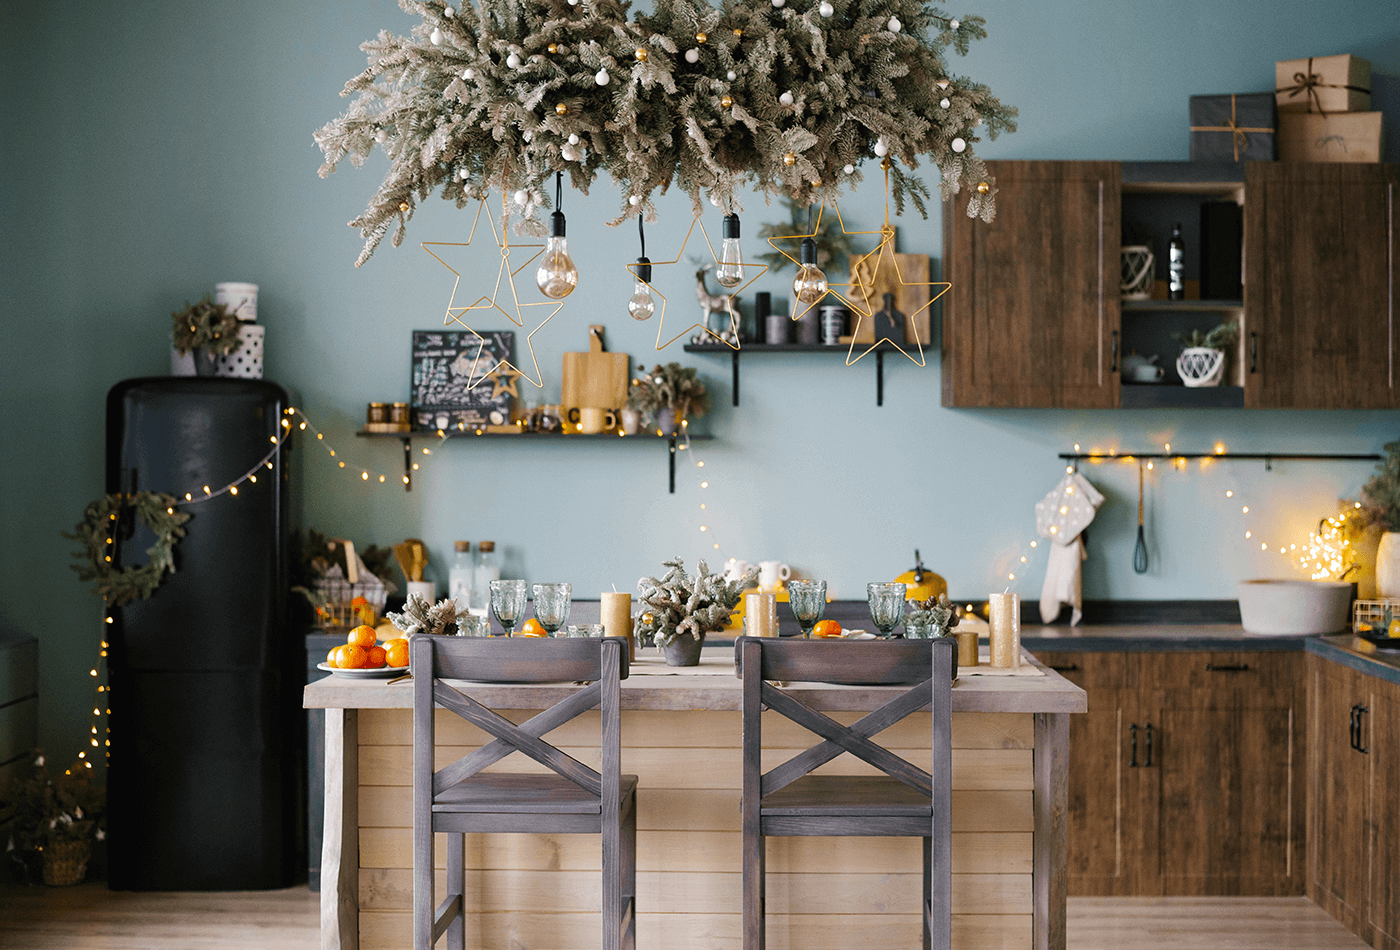 CHRISTMAS KITCHEN DECOR IN BLUE AND GOLD  Christmas kitchen, Christmas kitchen  decor, Blue kitchen decor